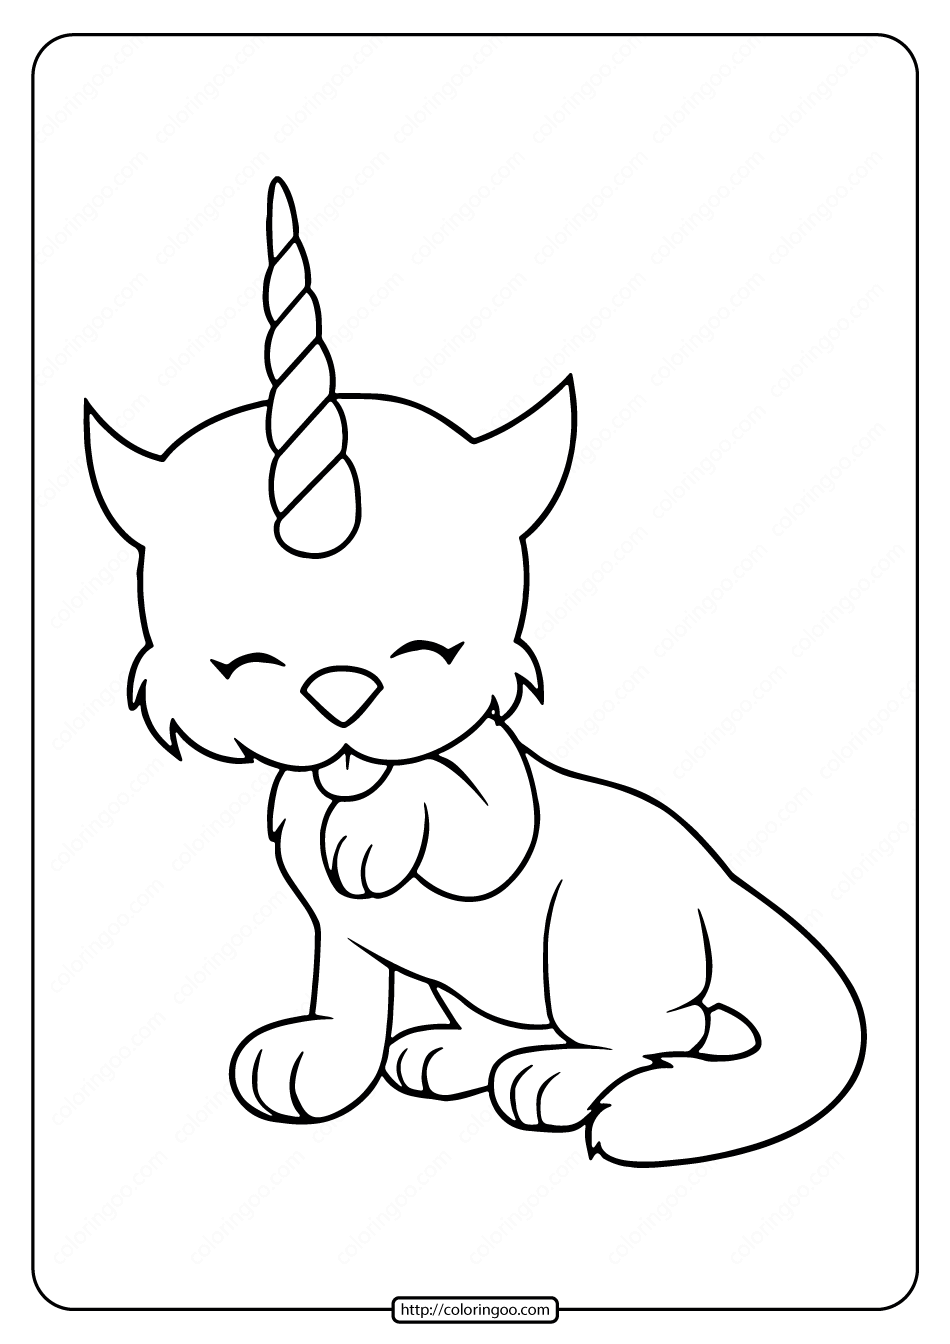 Unicorn Kitten Coloring Pages